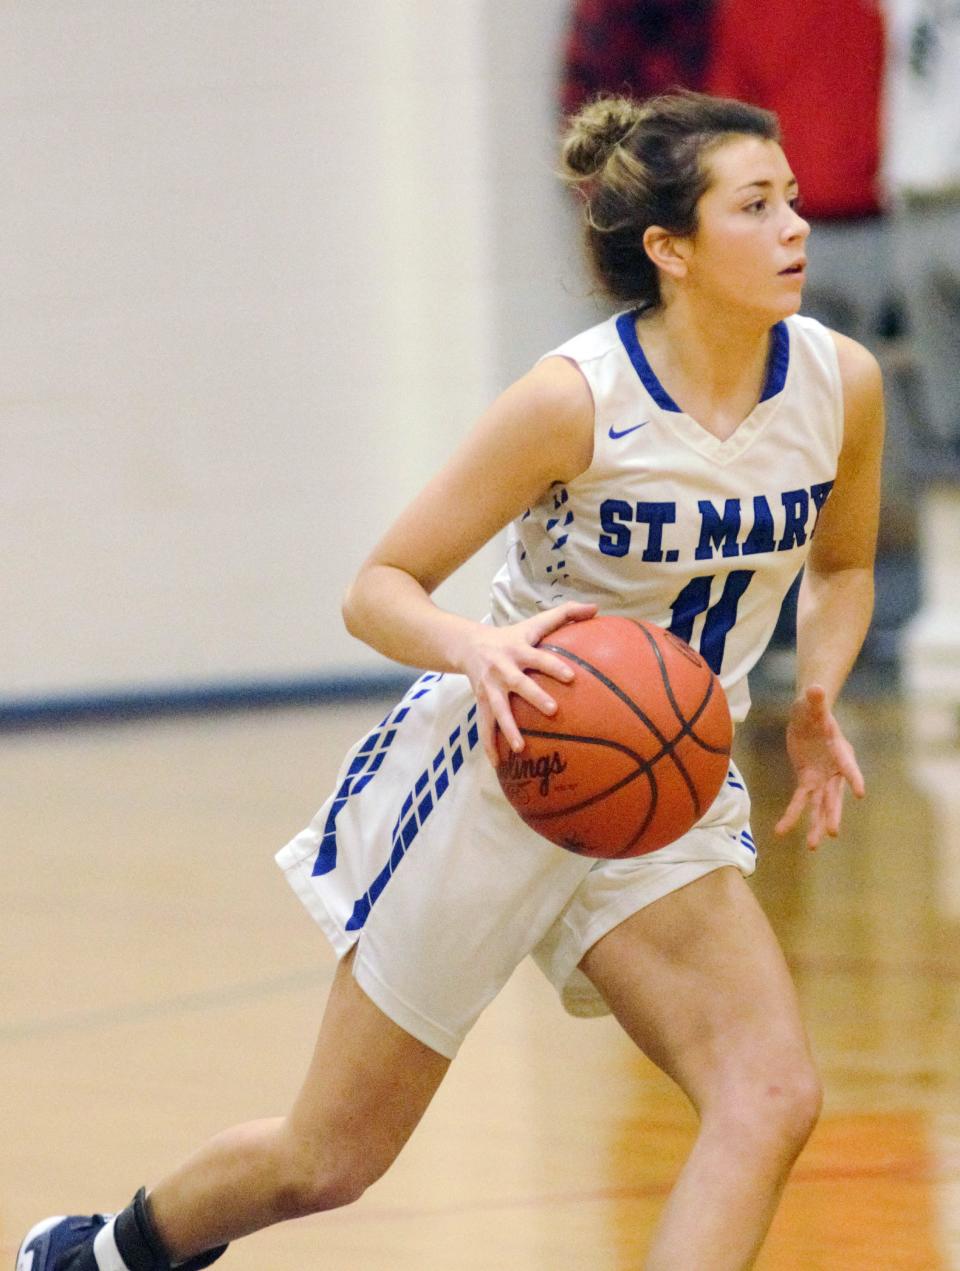 Macey Bebble and the Gaylord St. Mary girls have put together another strong campaign.